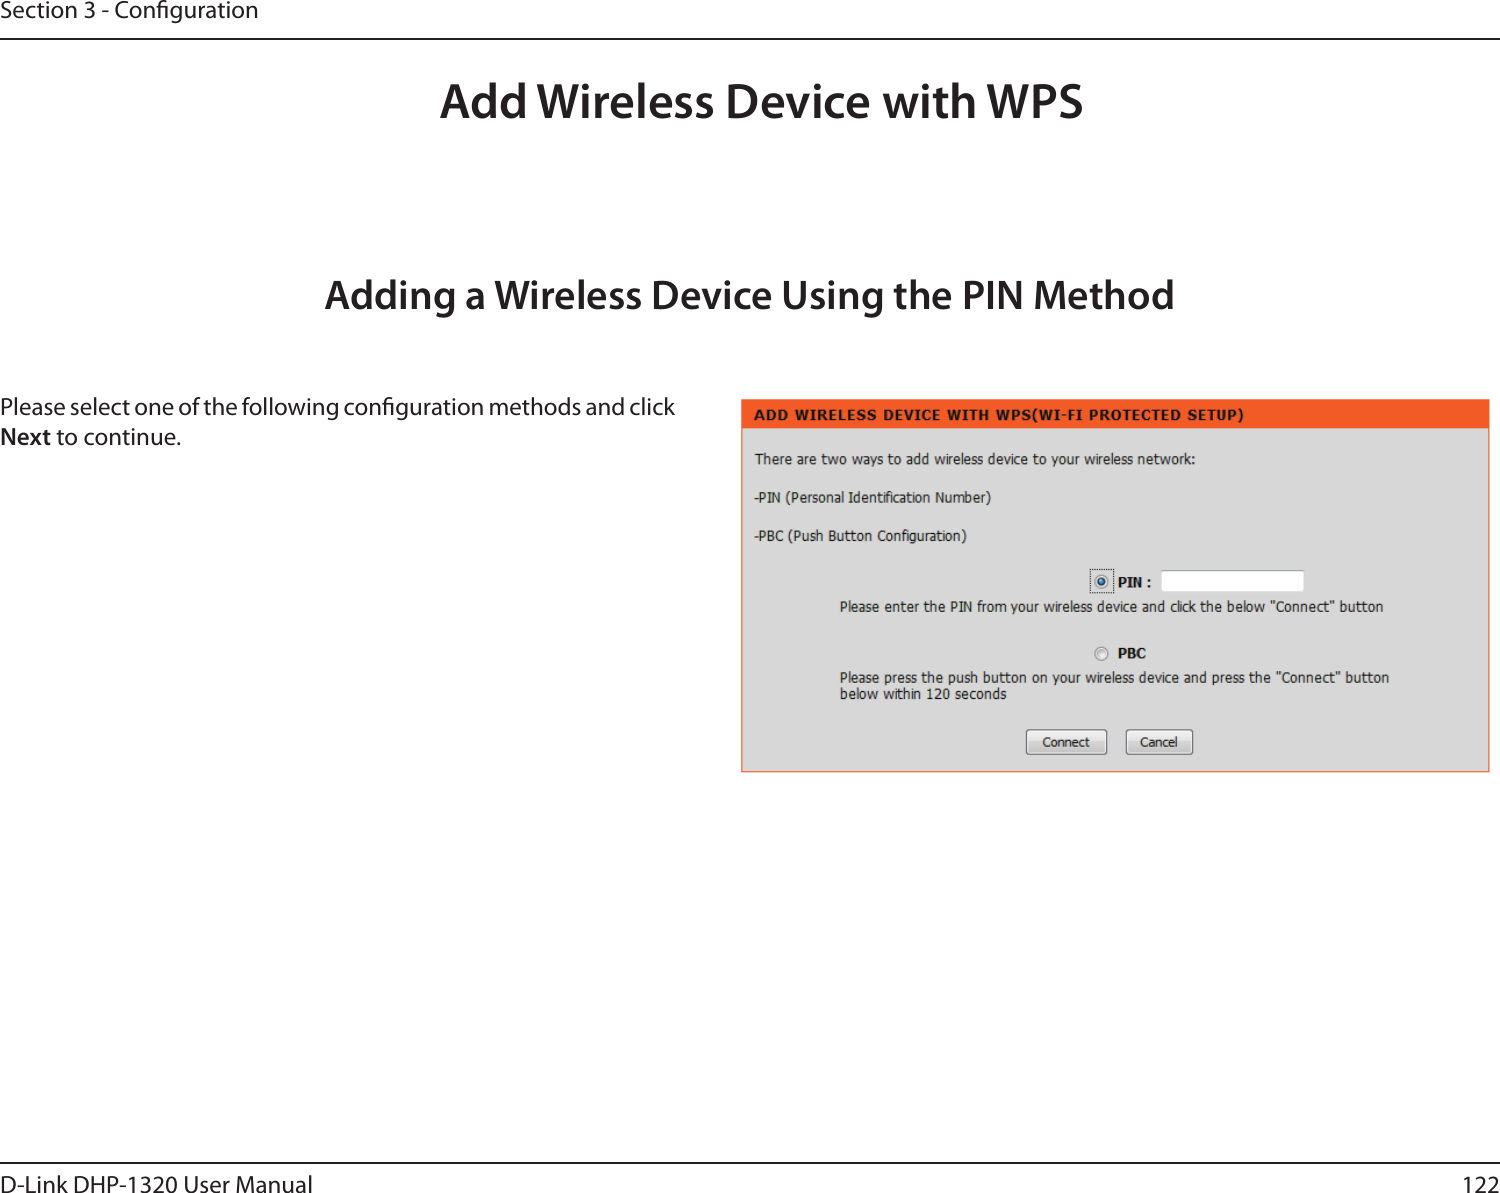 122D-Link DHP-1320 User ManualSection 3 - CongurationAdd Wireless Device with WPSAdding a Wireless Device Using the PIN MethodPlease select one of the following conguration methods and click Next to continue. 